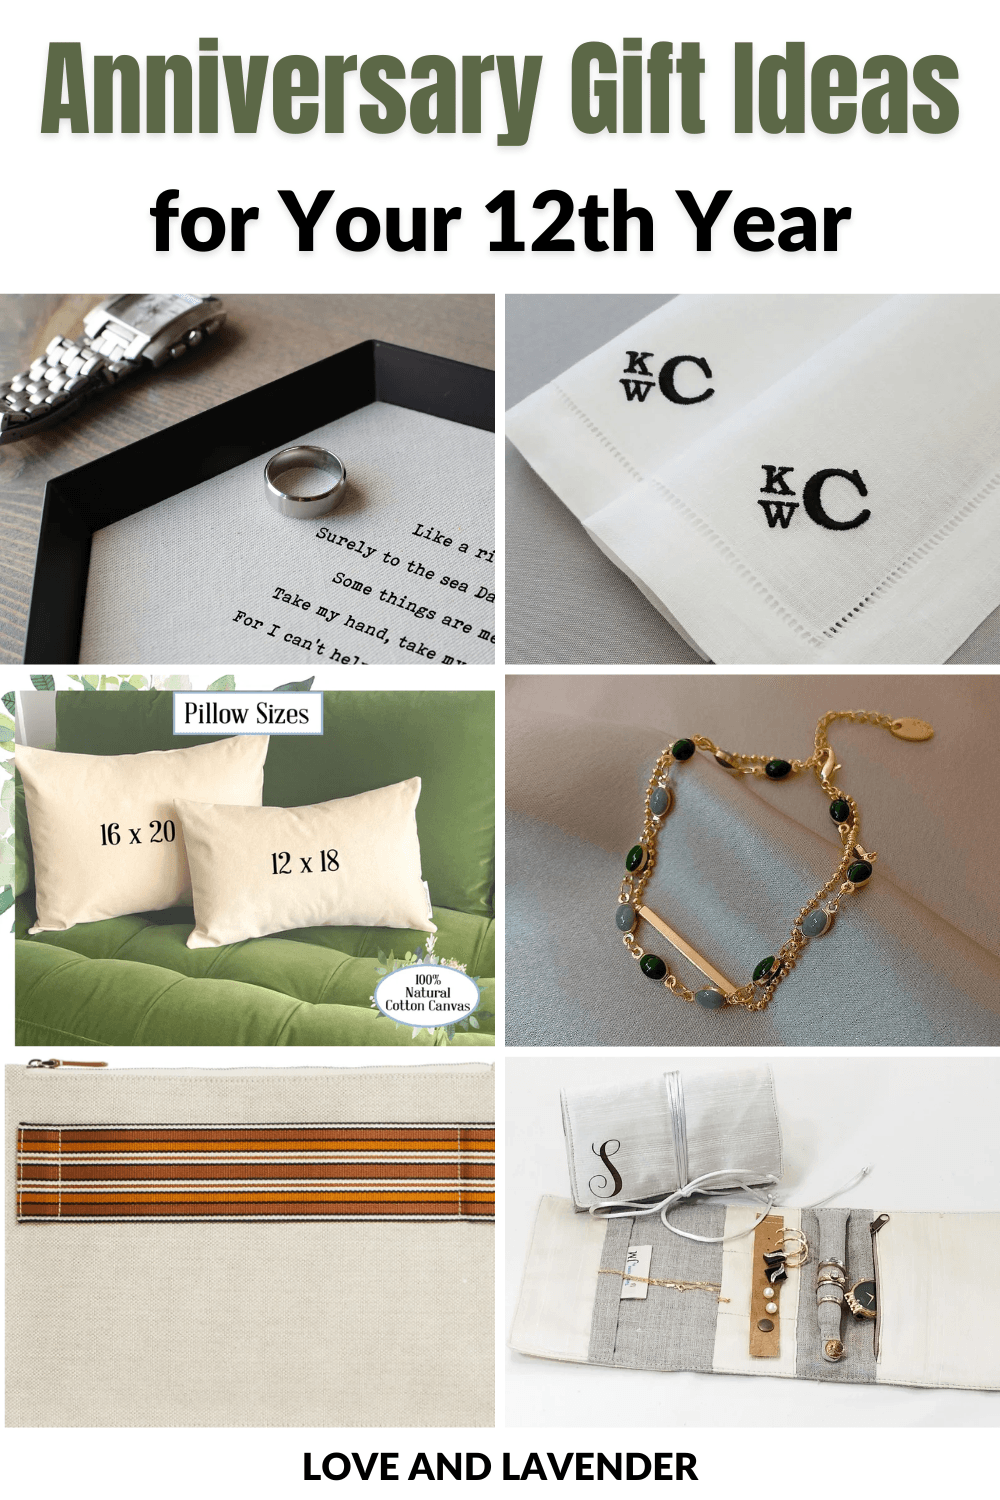 Seeking ideas for your 12th anniversary? Here are 18 lovely linen anniversary gift ideas that will delight any spouse. Our suggestions cover a wide variety of themes, price ranges, and methods—from traditional to unique!